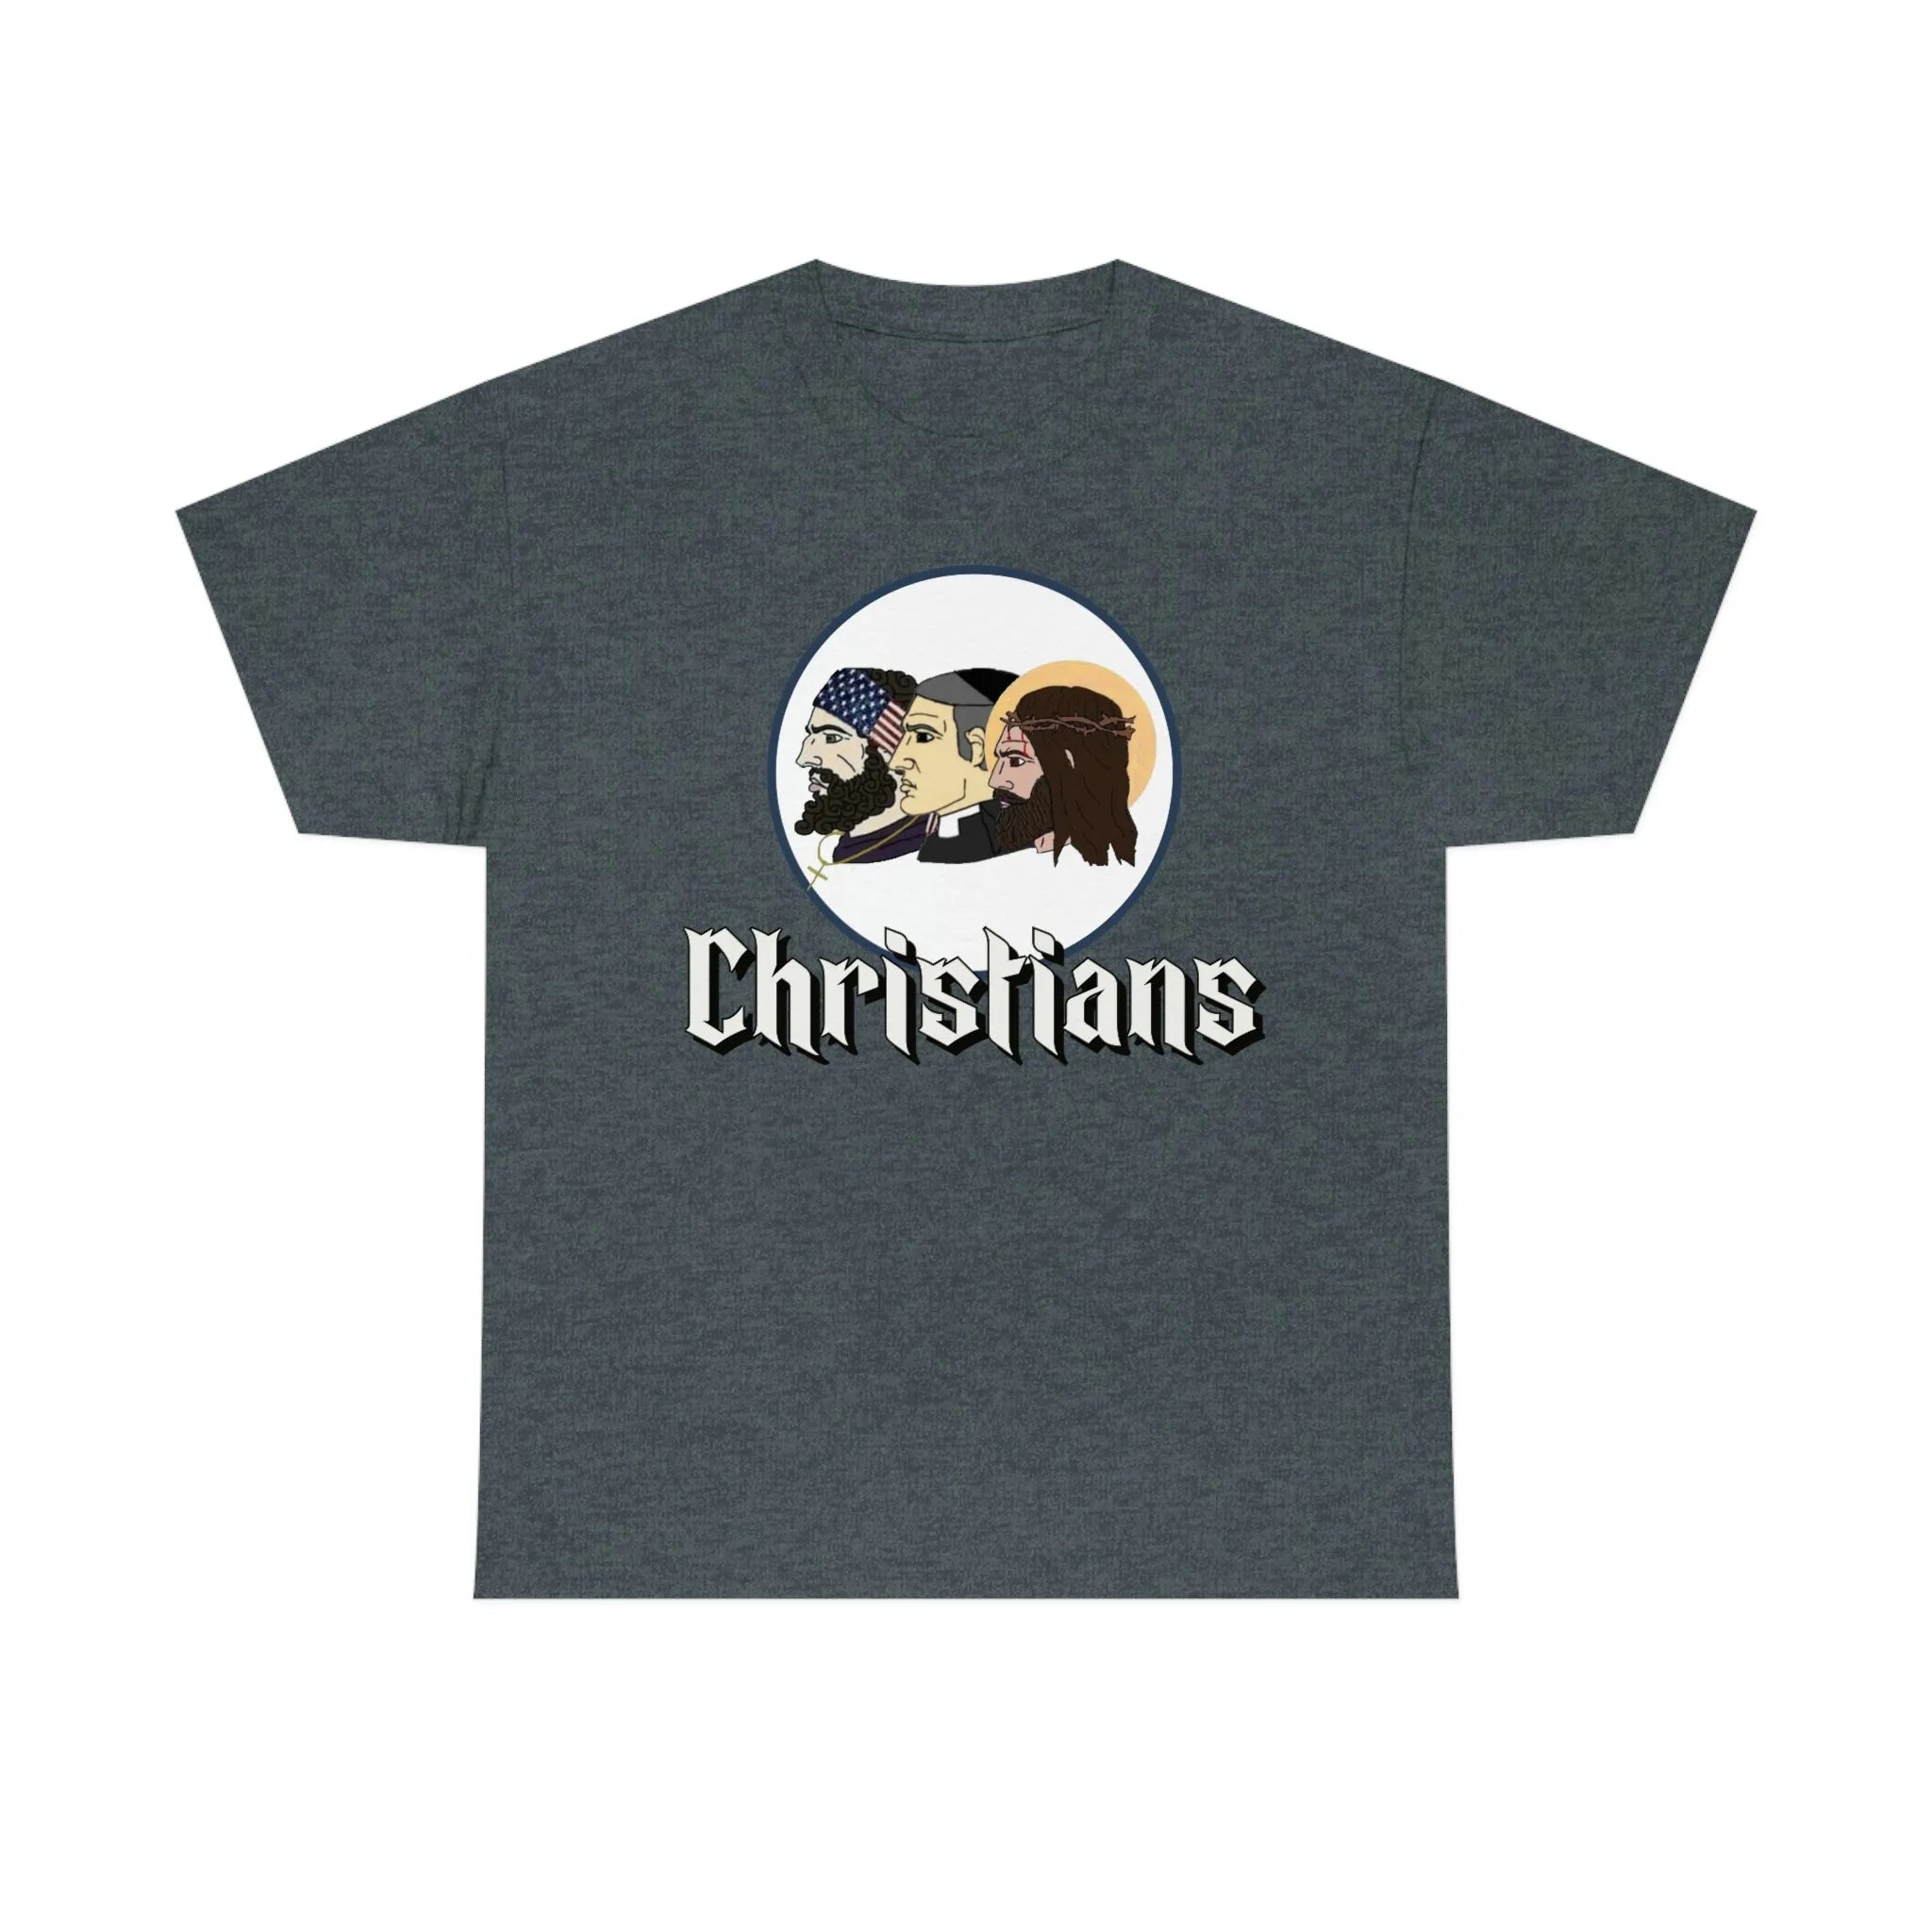 "Christians" In Nomine Patris Team Jersey